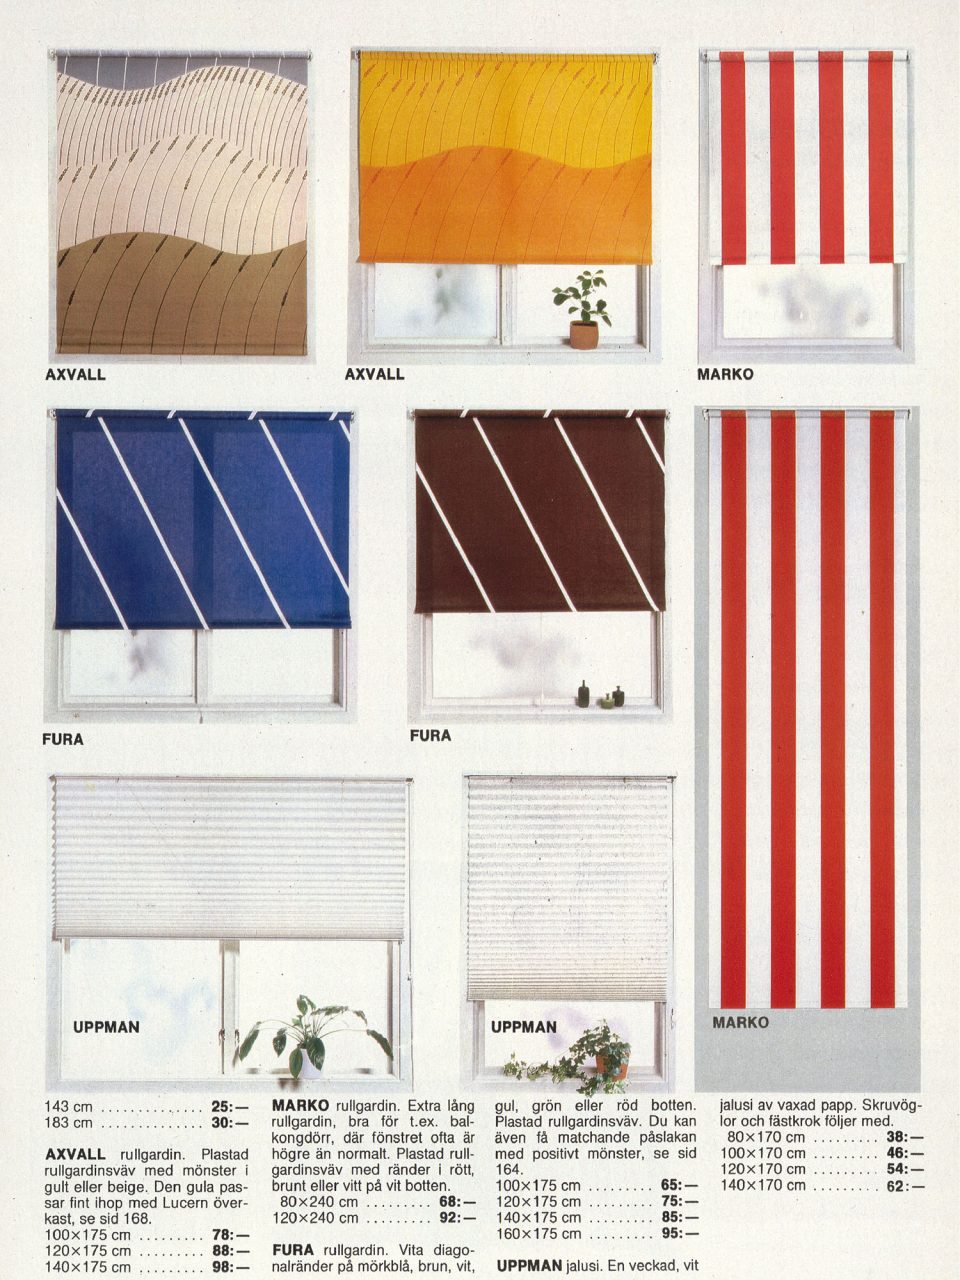 1980 IKEA catalogue page featuring various patterned roller blinds.